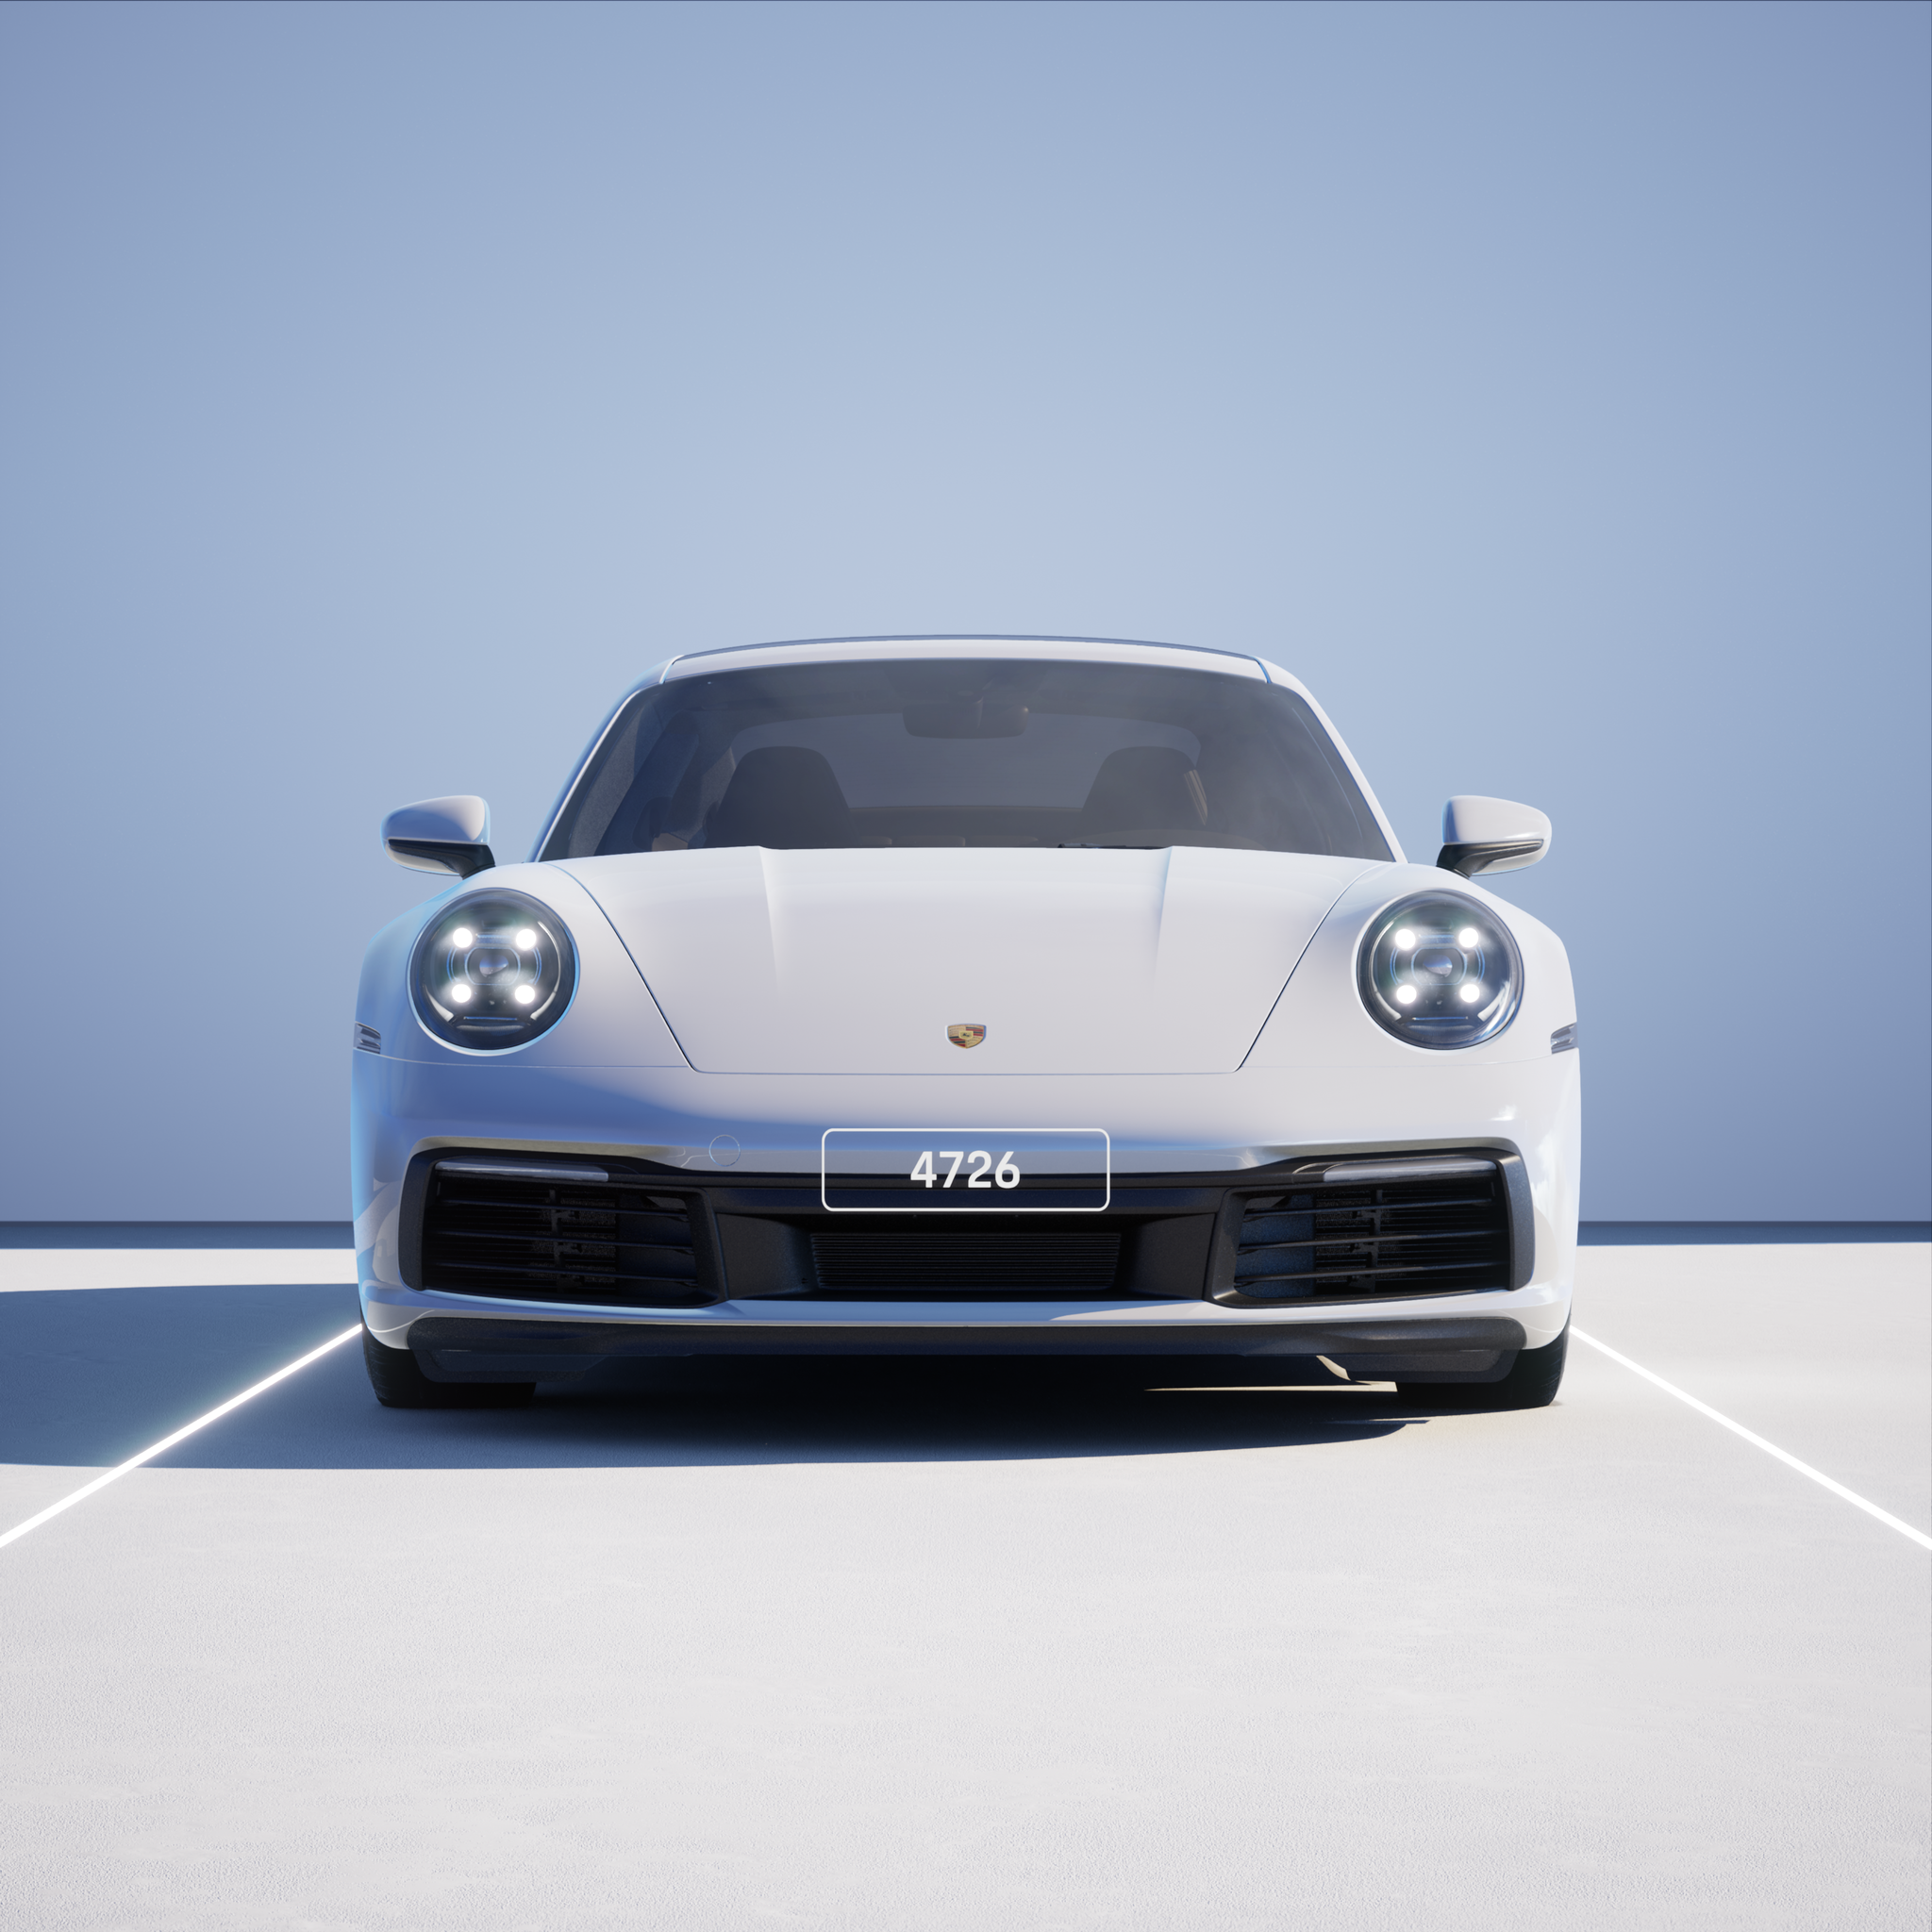 The PORSCHΞ 911 4726 image in phase